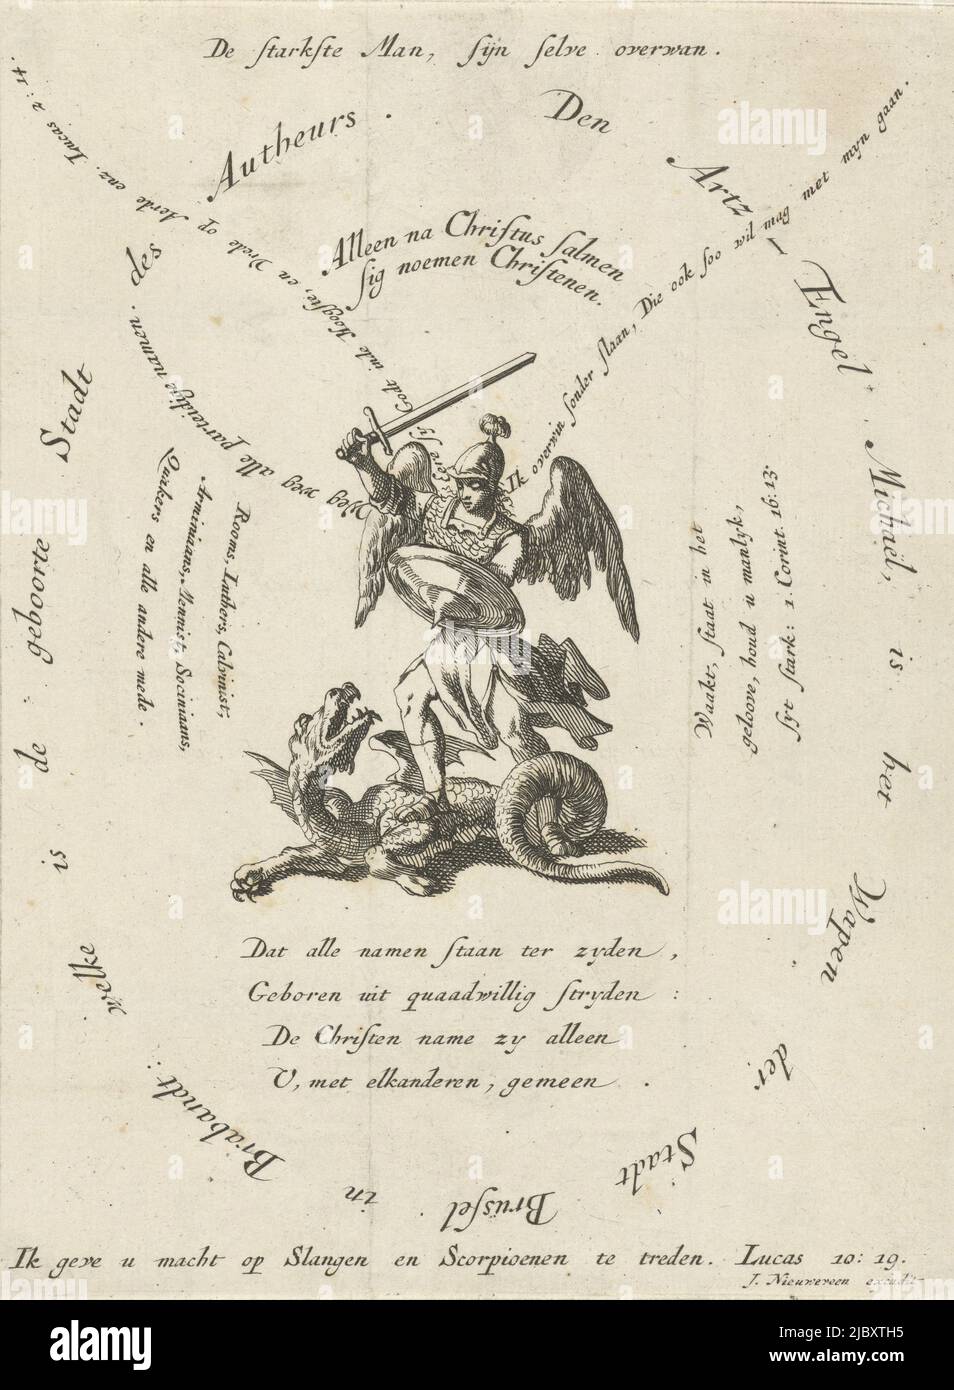 Archangel Michael slays the dragon, surrounded by various inscriptions, print maker: Jan Luyken, publisher: Jacobus van Nieuweveen, (mentioned on object), Amsterdam, 1694, paper, etching, h 182 mm × w 136 mm Stock Photo